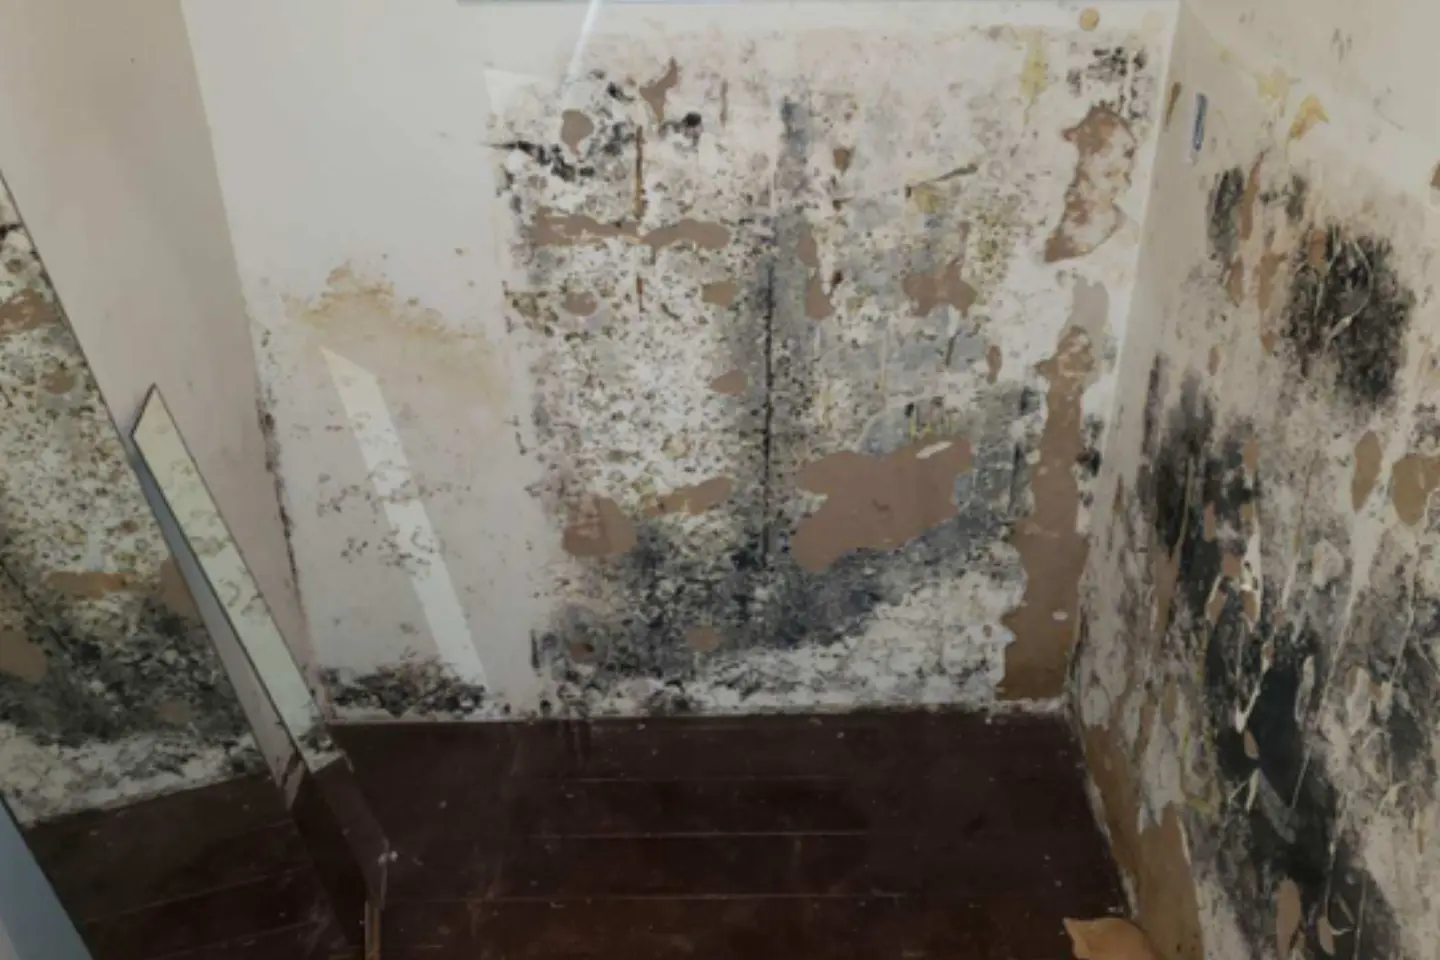 A bathroom with mold and water damage.